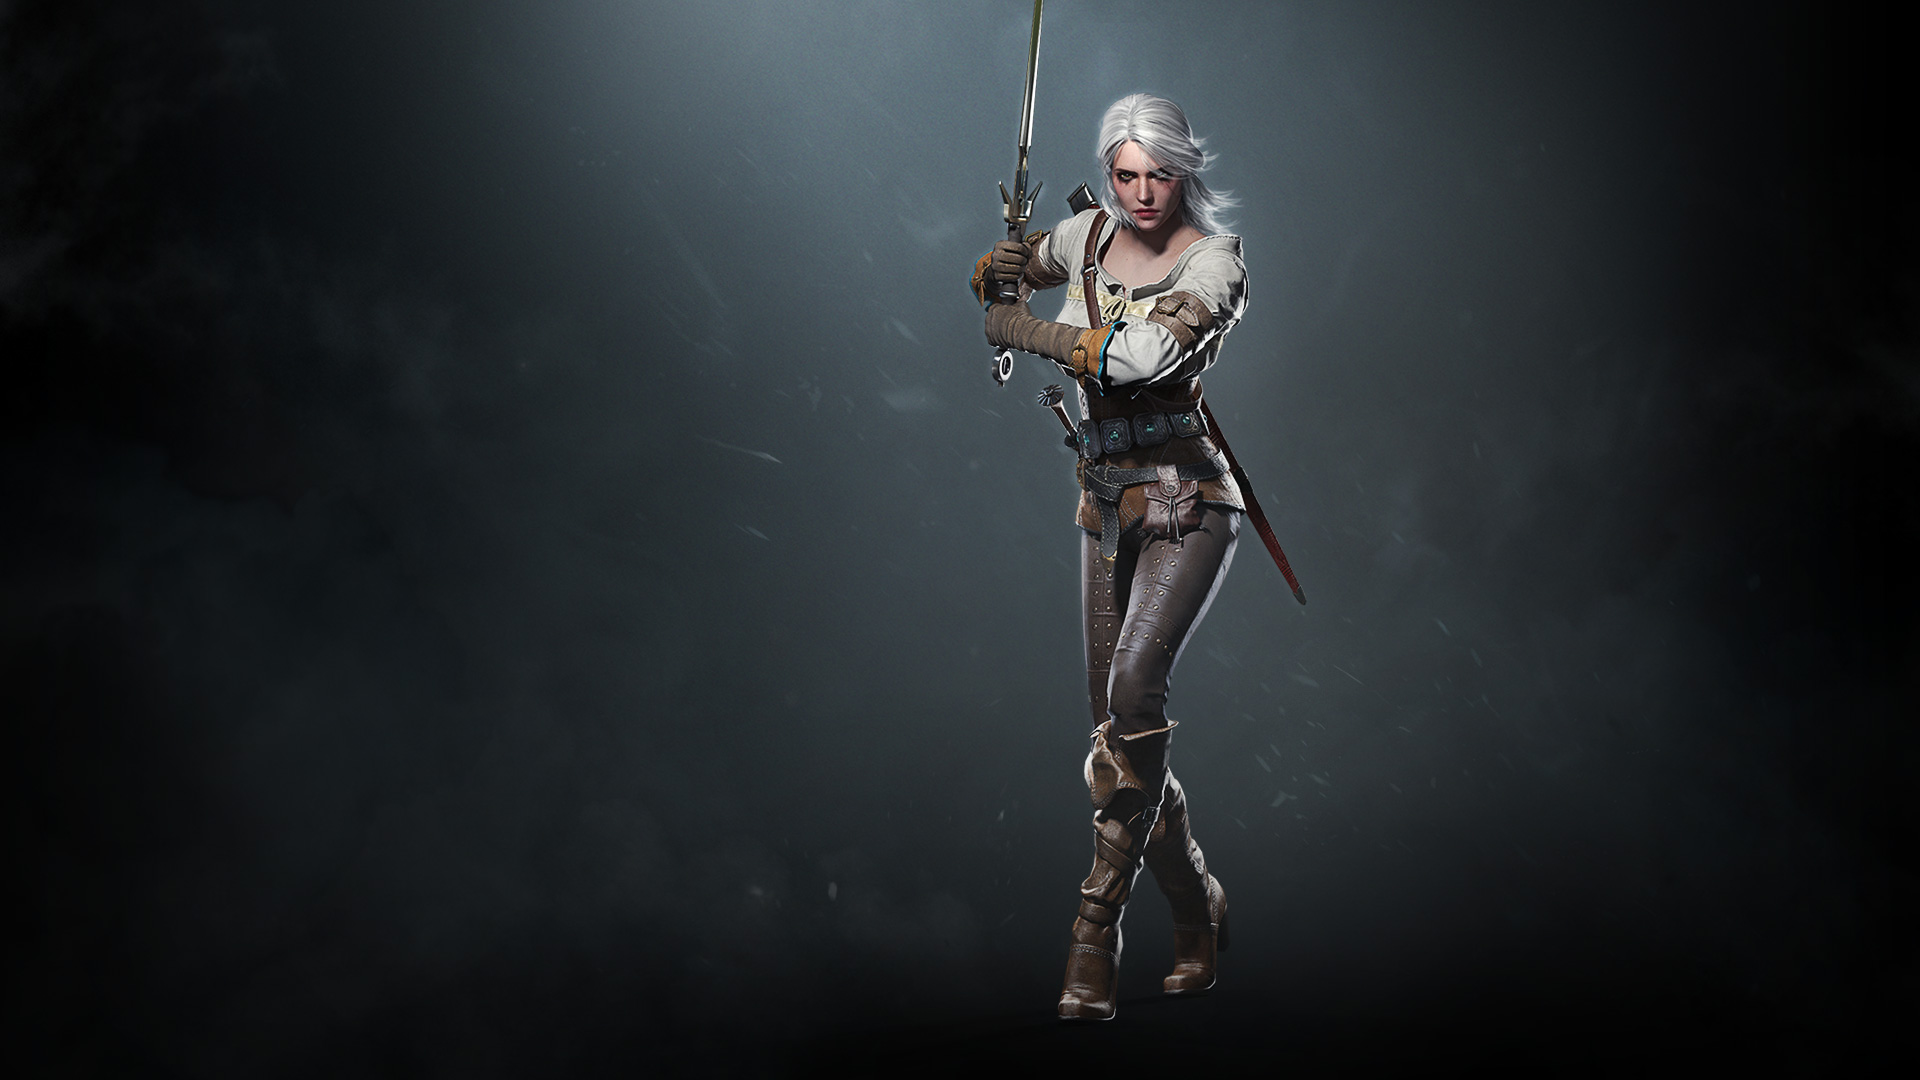 General 1920x1080 The Witcher 3: Wild Hunt women video game art PC gaming CD Projekt RED